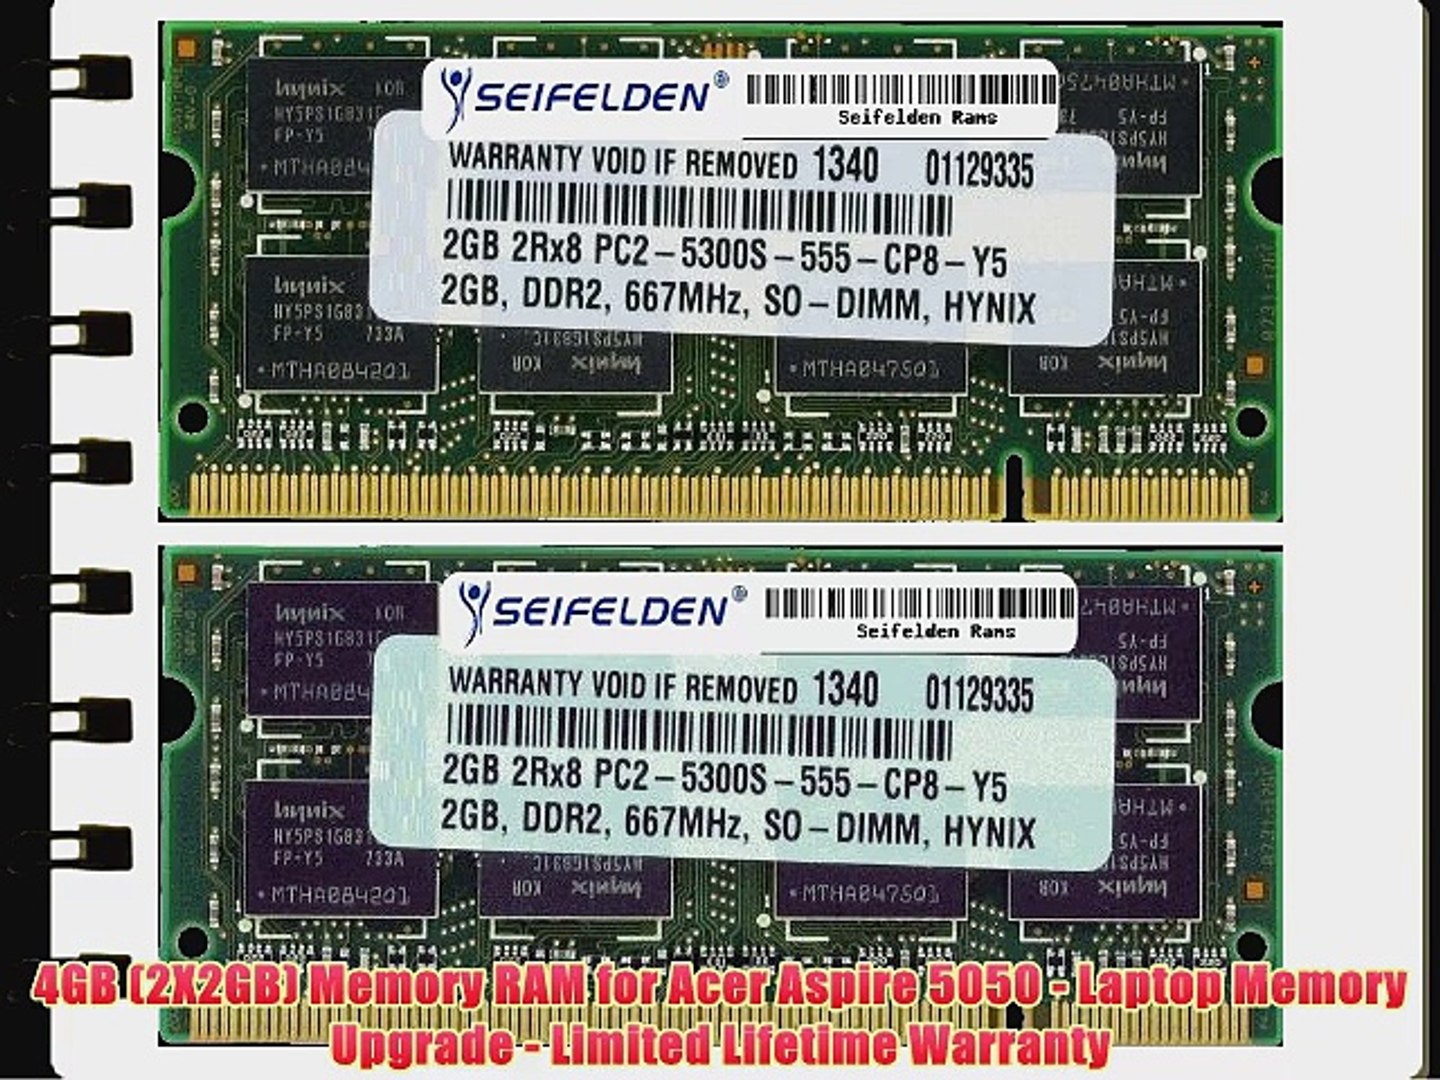 4GB (2X2GB) Memory RAM for Acer Aspire 5050 - Laptop Memory Upgrade -  Limited Lifetime Warranty - video Dailymotion